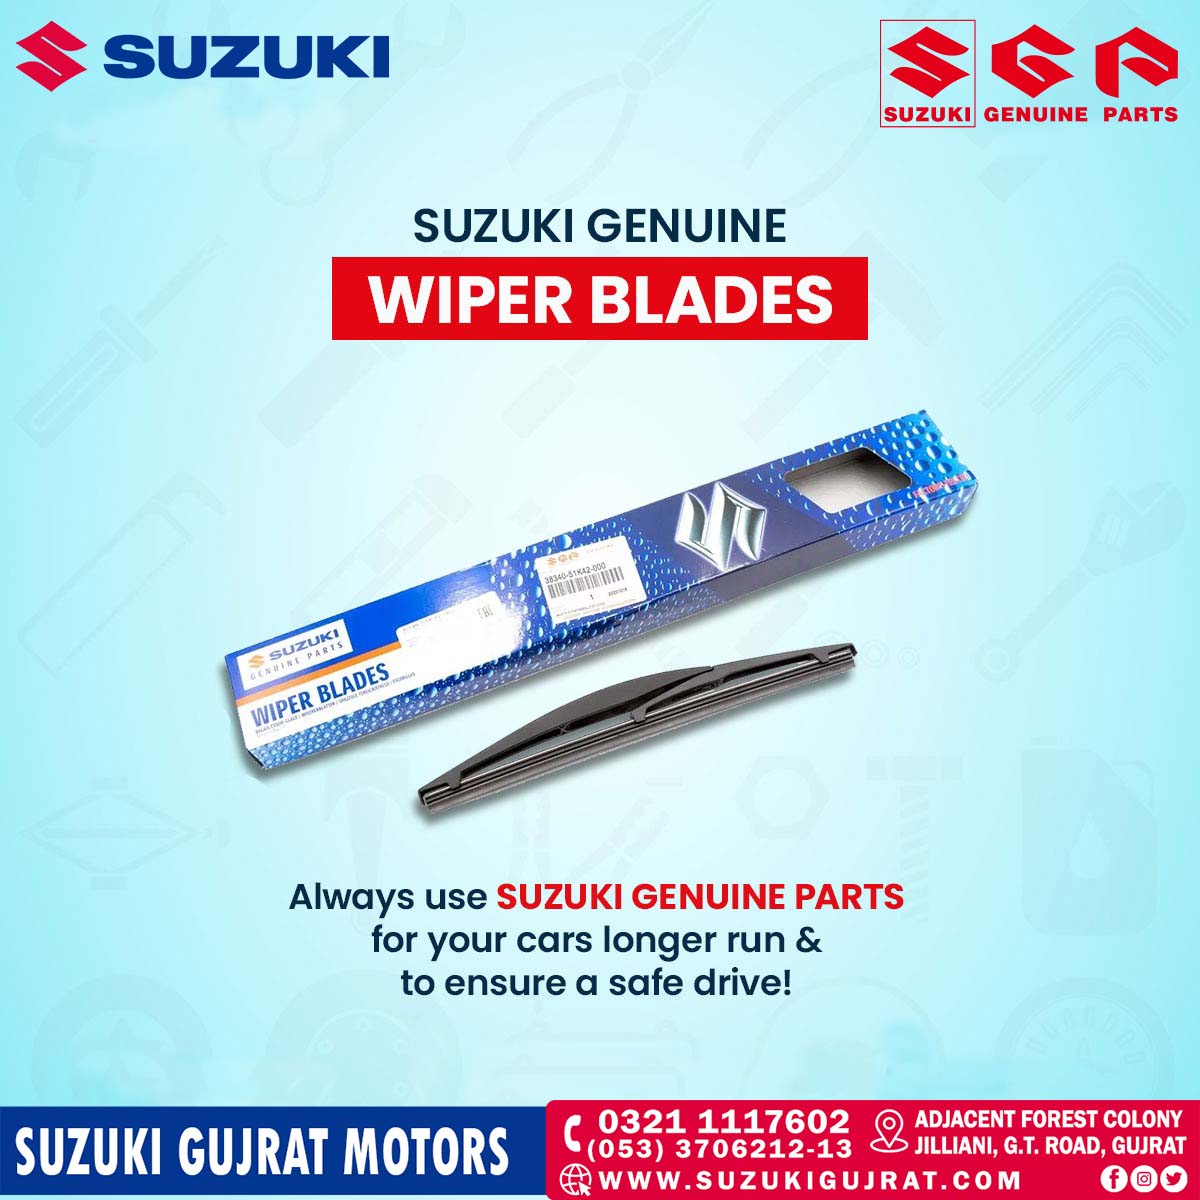 Prioritize safety and durability on the road by opting for Suzuki Genuine Wiper Blades for your car. Ensure a clear and reliable vision in all conditions, exclusively available at Suzuki Gujrat Motors.

#Suzuki #GenuineParts #GenuineWiperBlades #SuzukiGujratMotors #SuzukiPakistan